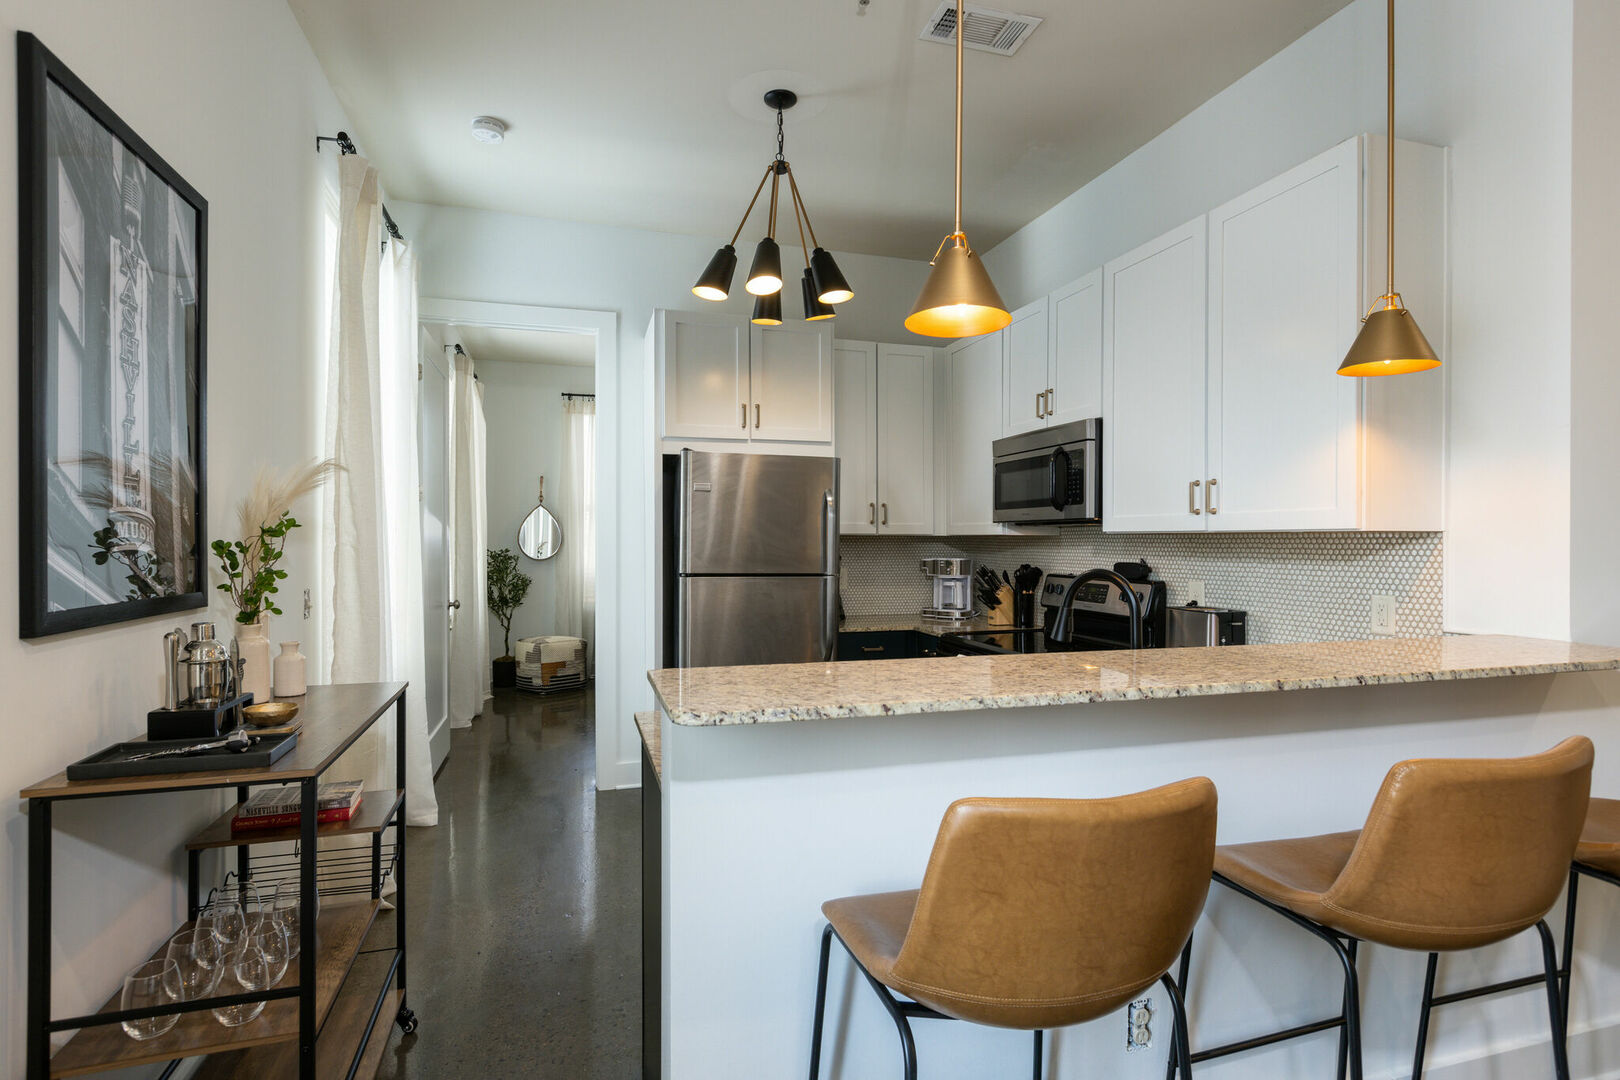 Fully equipped kitchen with stainless steel appliances, granite counter tops, breakfast bar seating, and stocked with your basic cooking essentials.